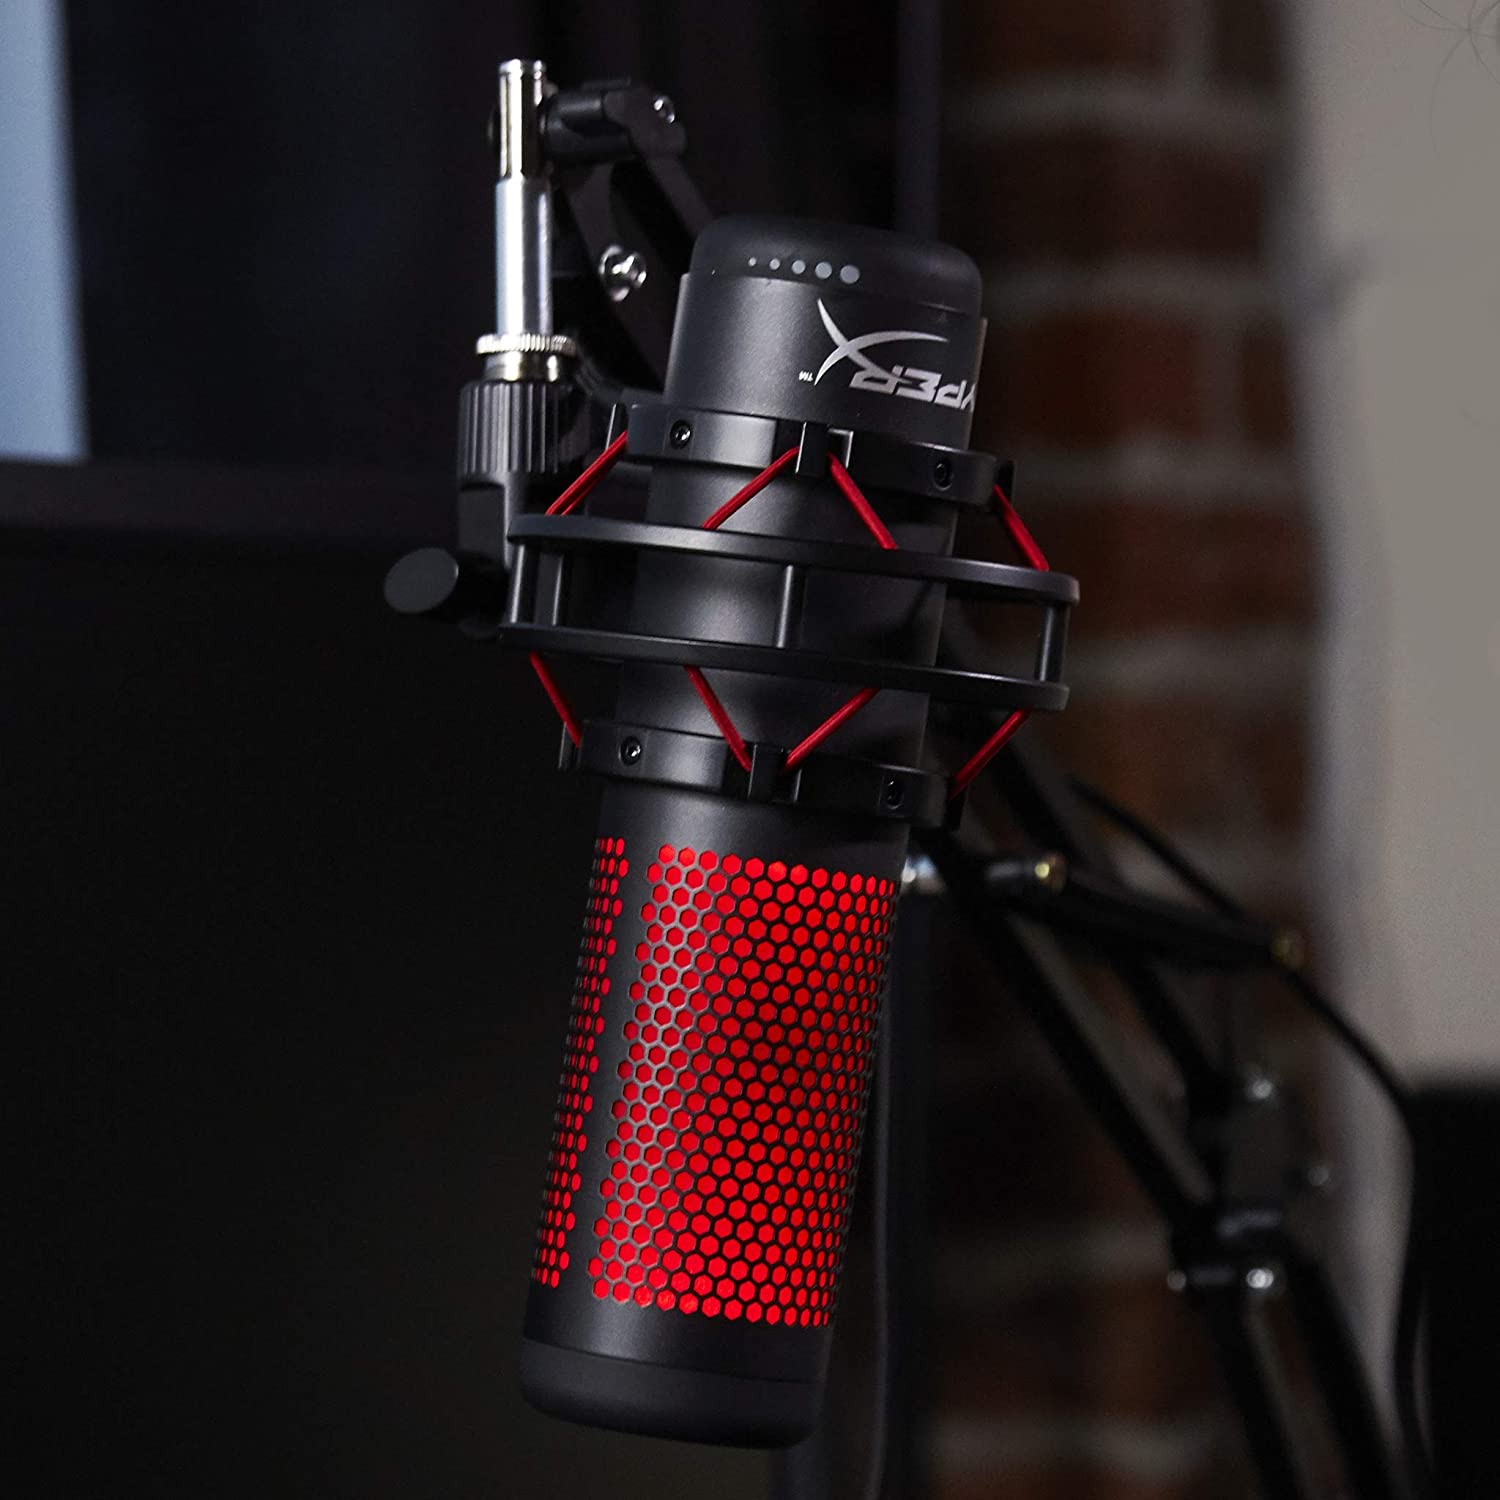 HyperX QuadCast Review: Full featured USB mic aimed at streamers